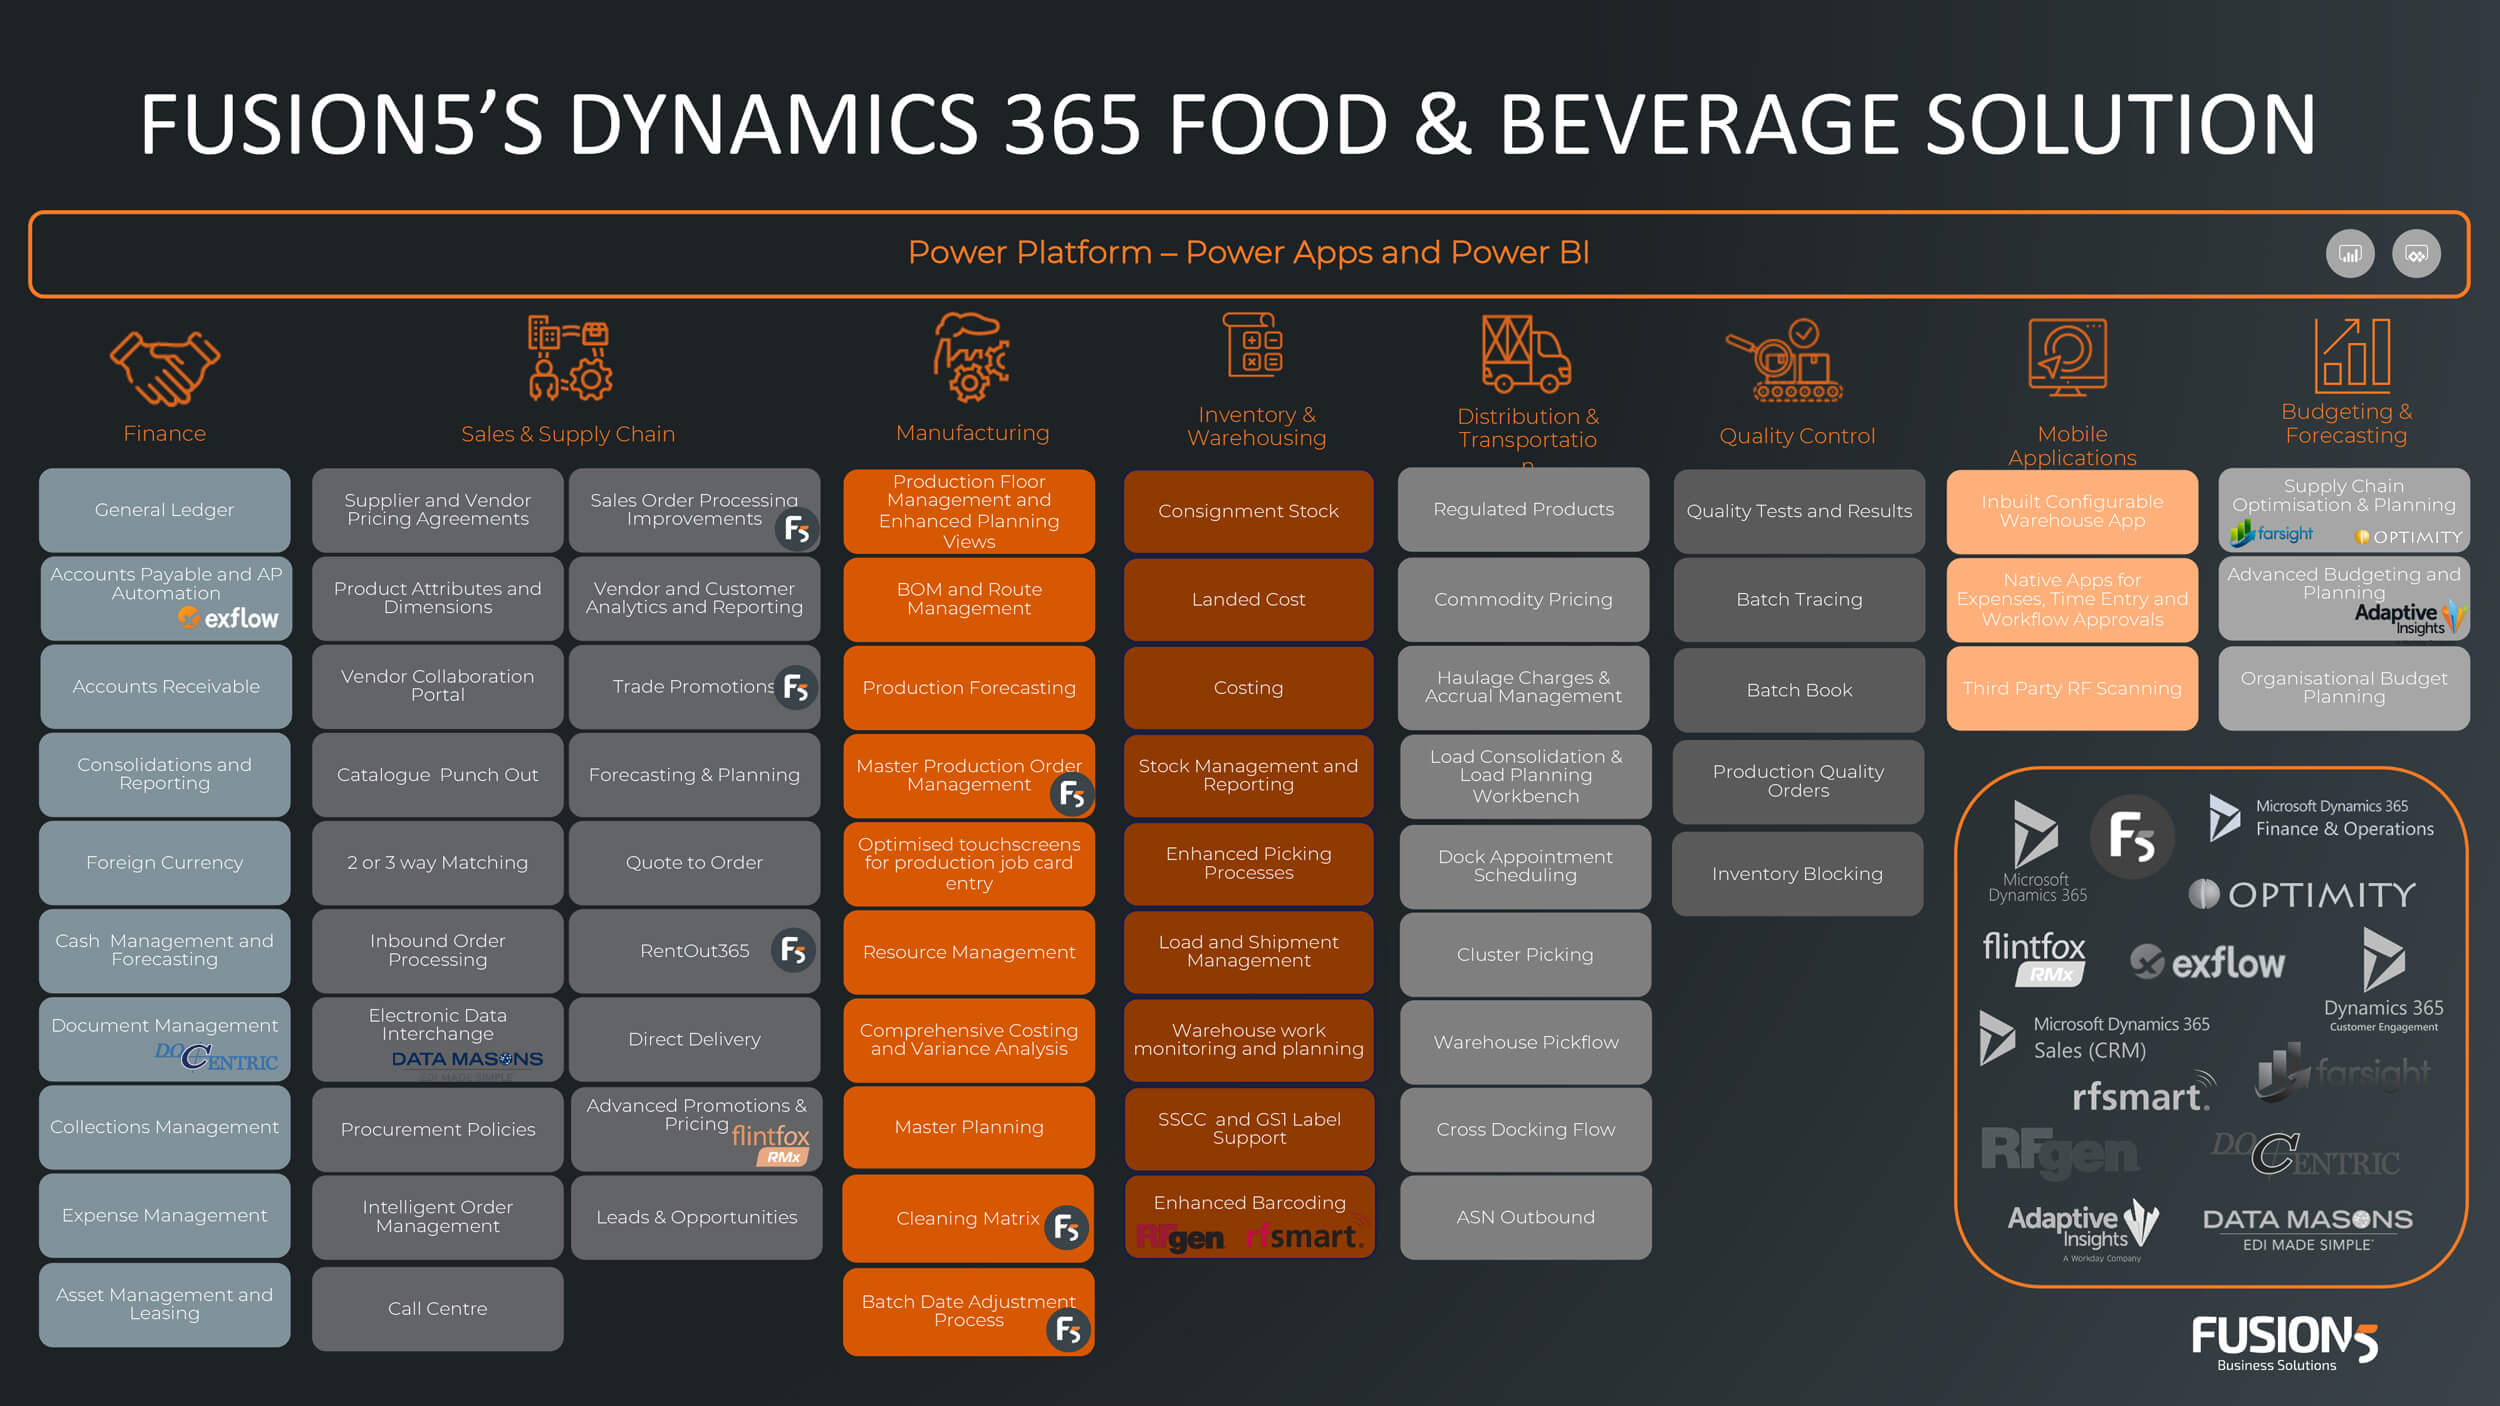 Fusion5 Food And Beverage Solution grid